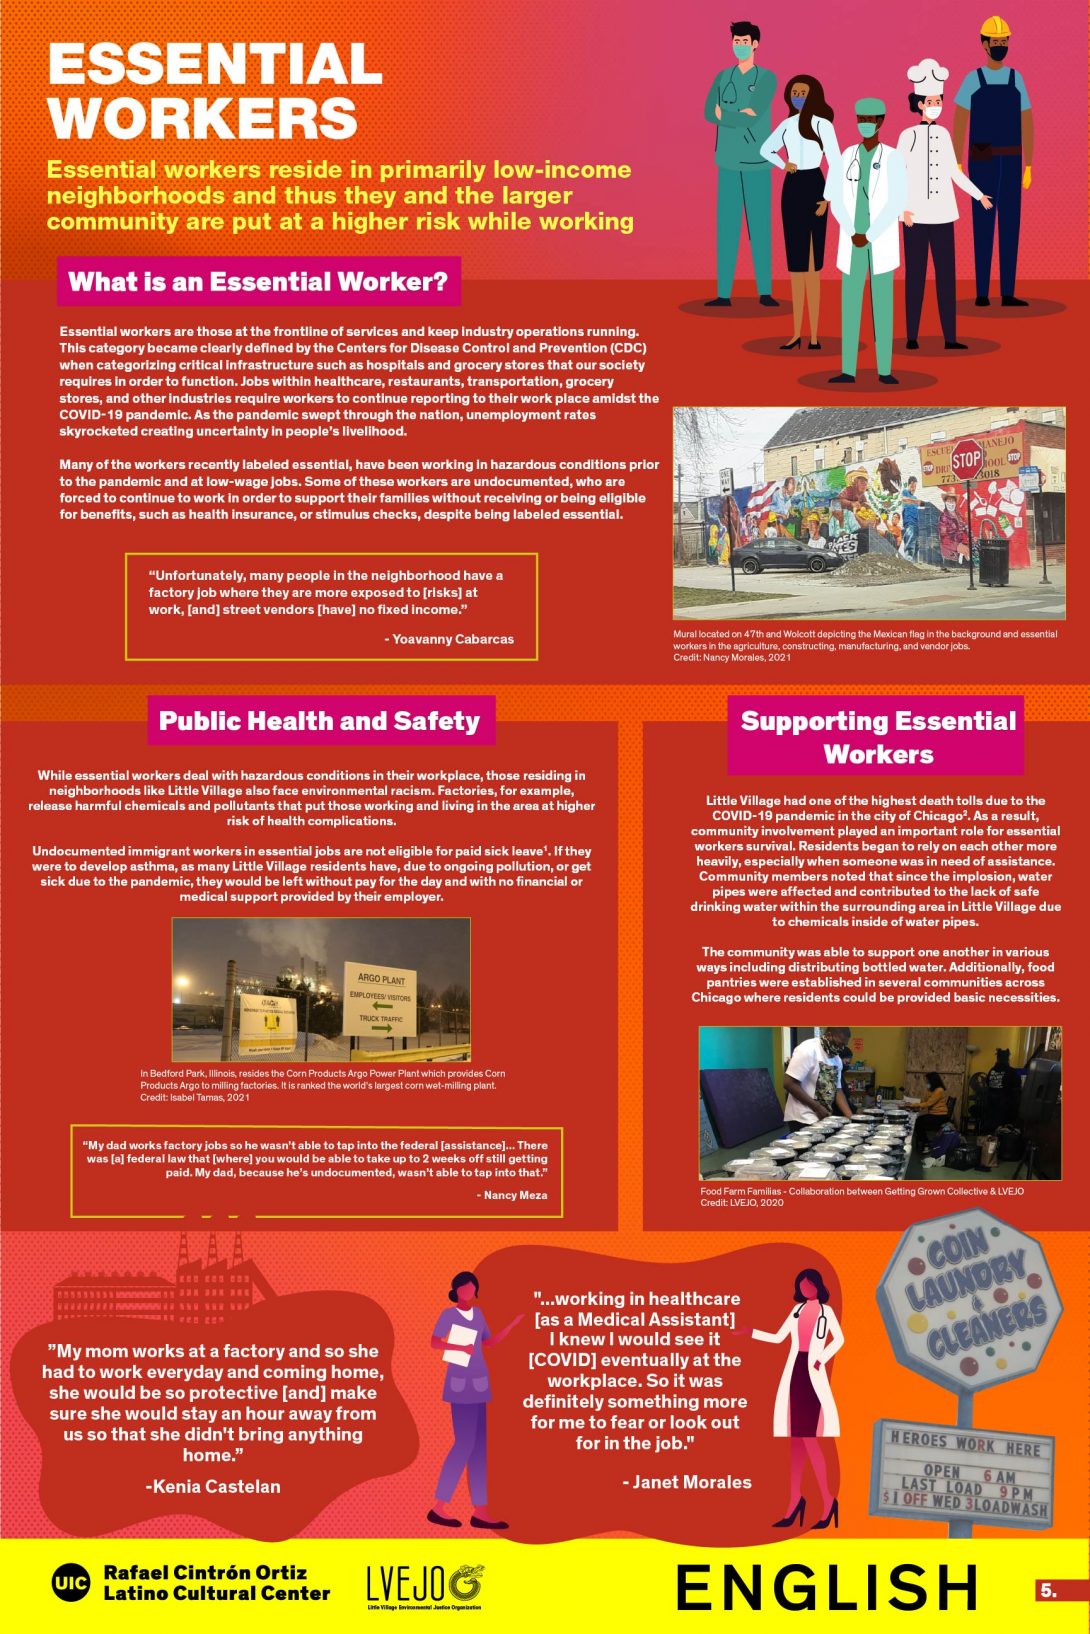 Header image of the second infographic includes workers who are considered essential